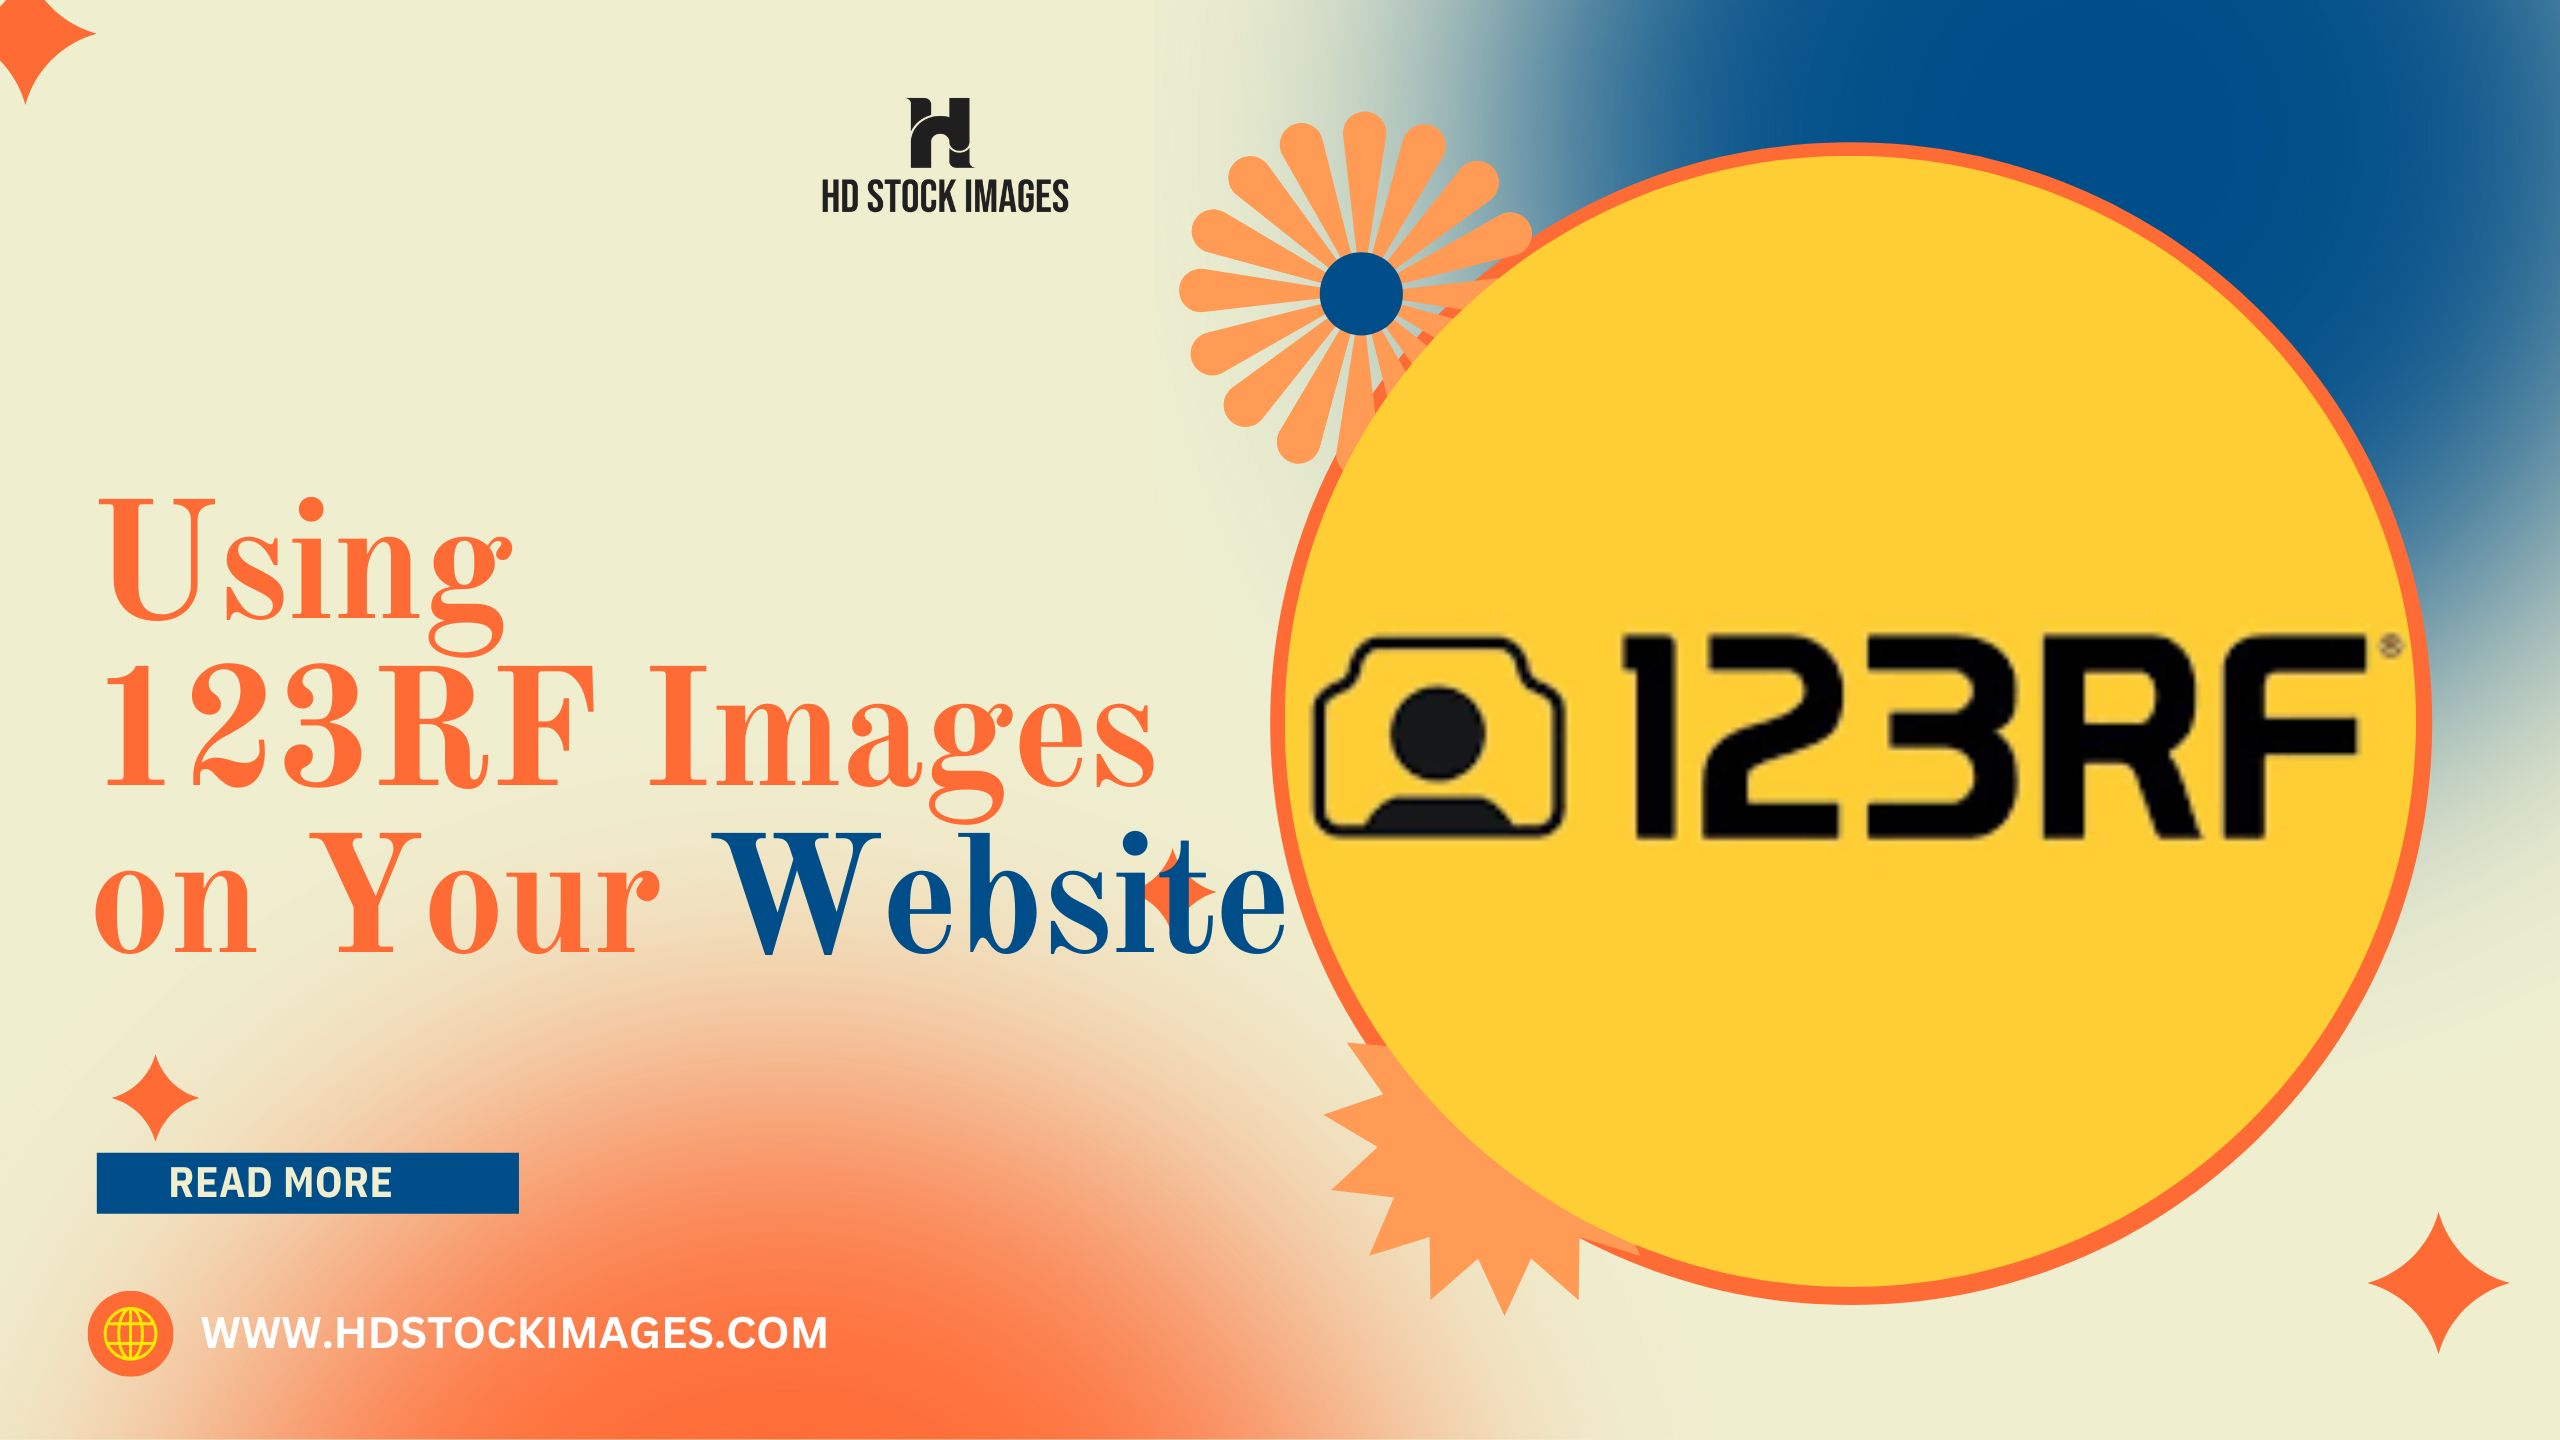 an image of Guidelines for Using 123RF Images on Your Website: Incorporating Copyrighted Content